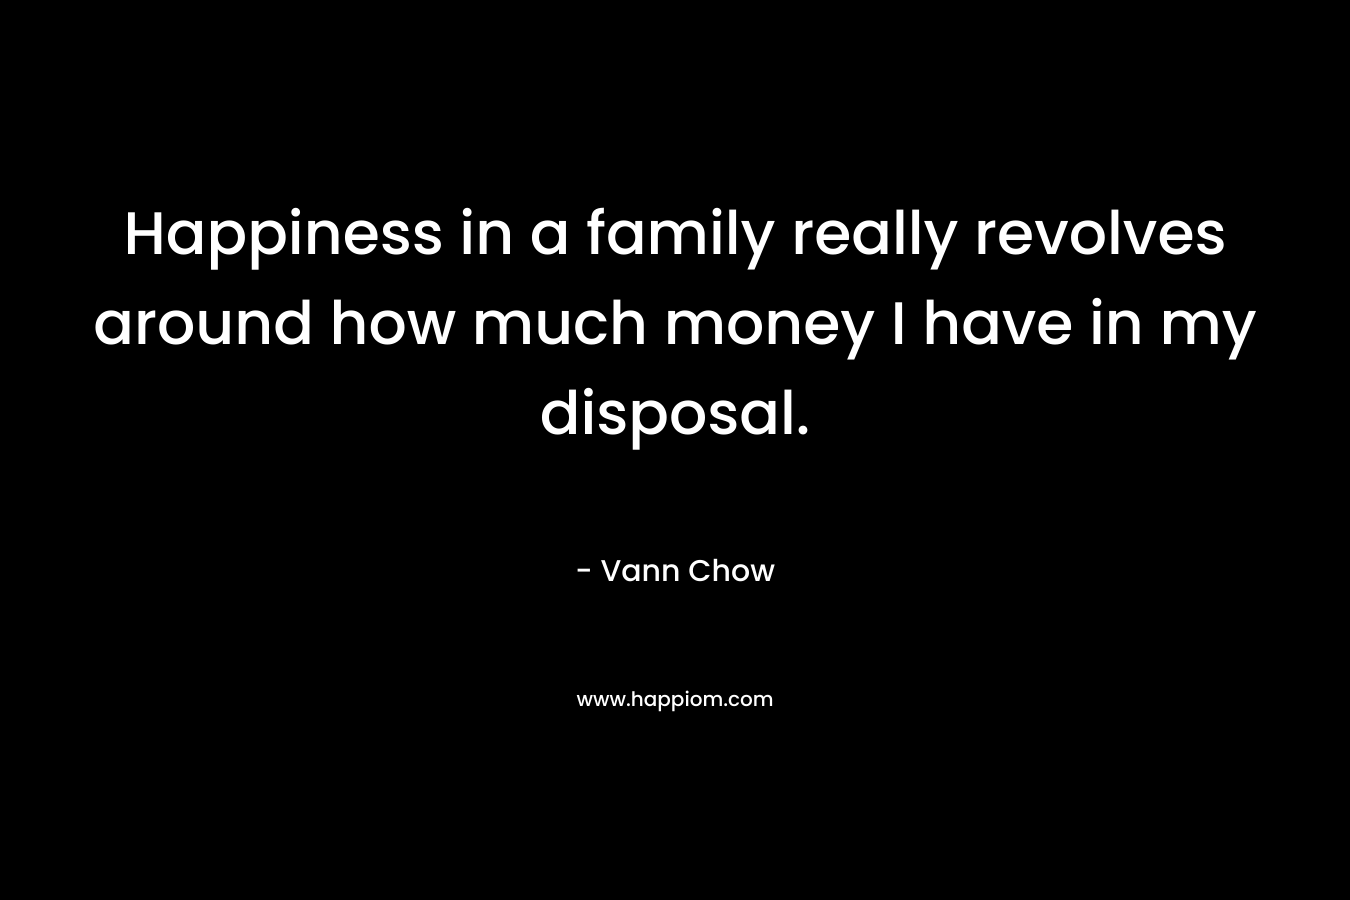 Happiness in a family really revolves around how much money I have in my disposal.